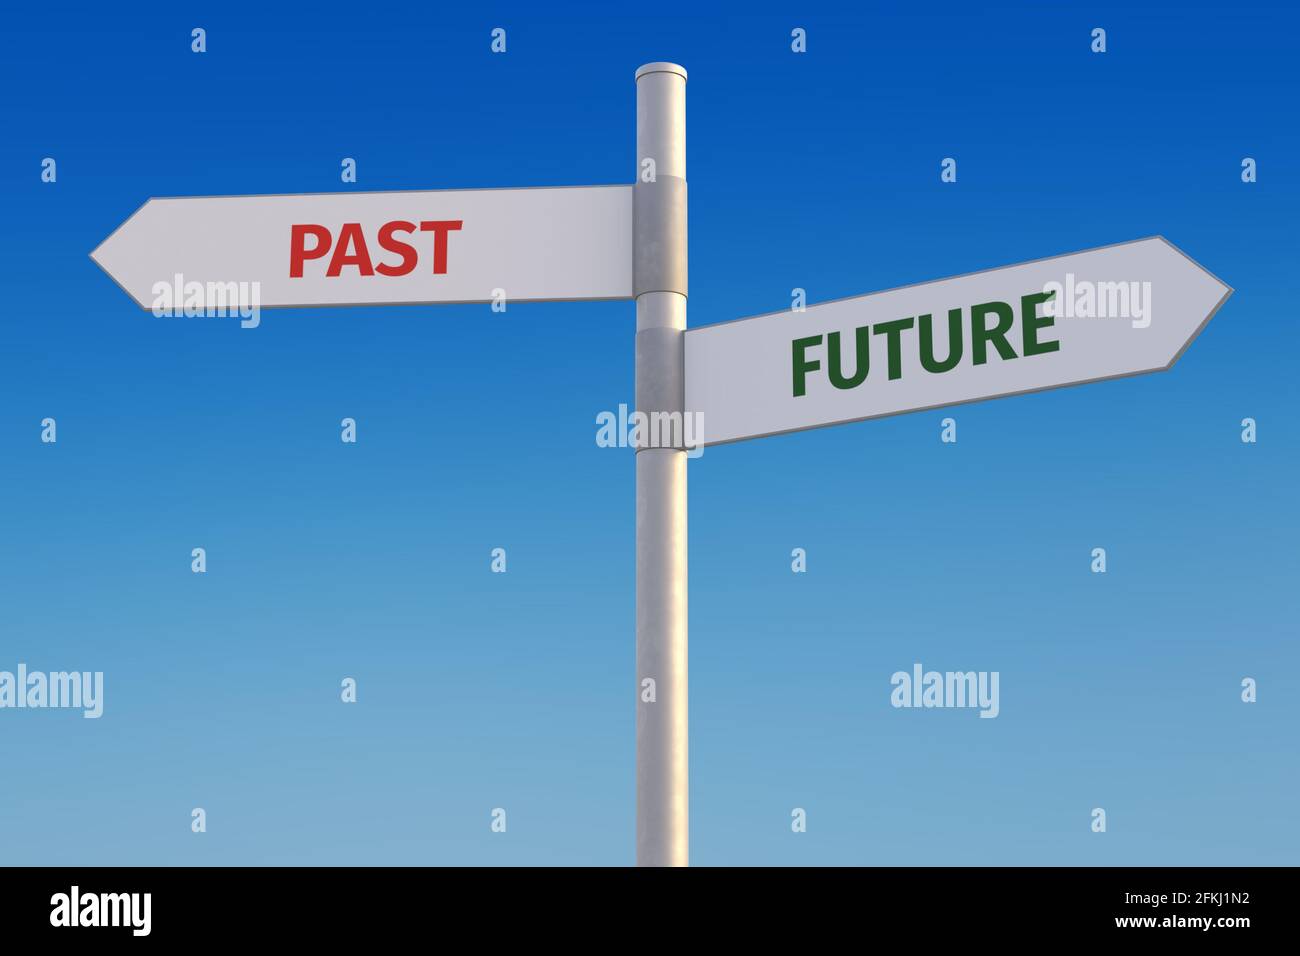 Past vs. future concept. Two street signs pointing into opposite directions. Looking forward or looking backwards Stock Photo